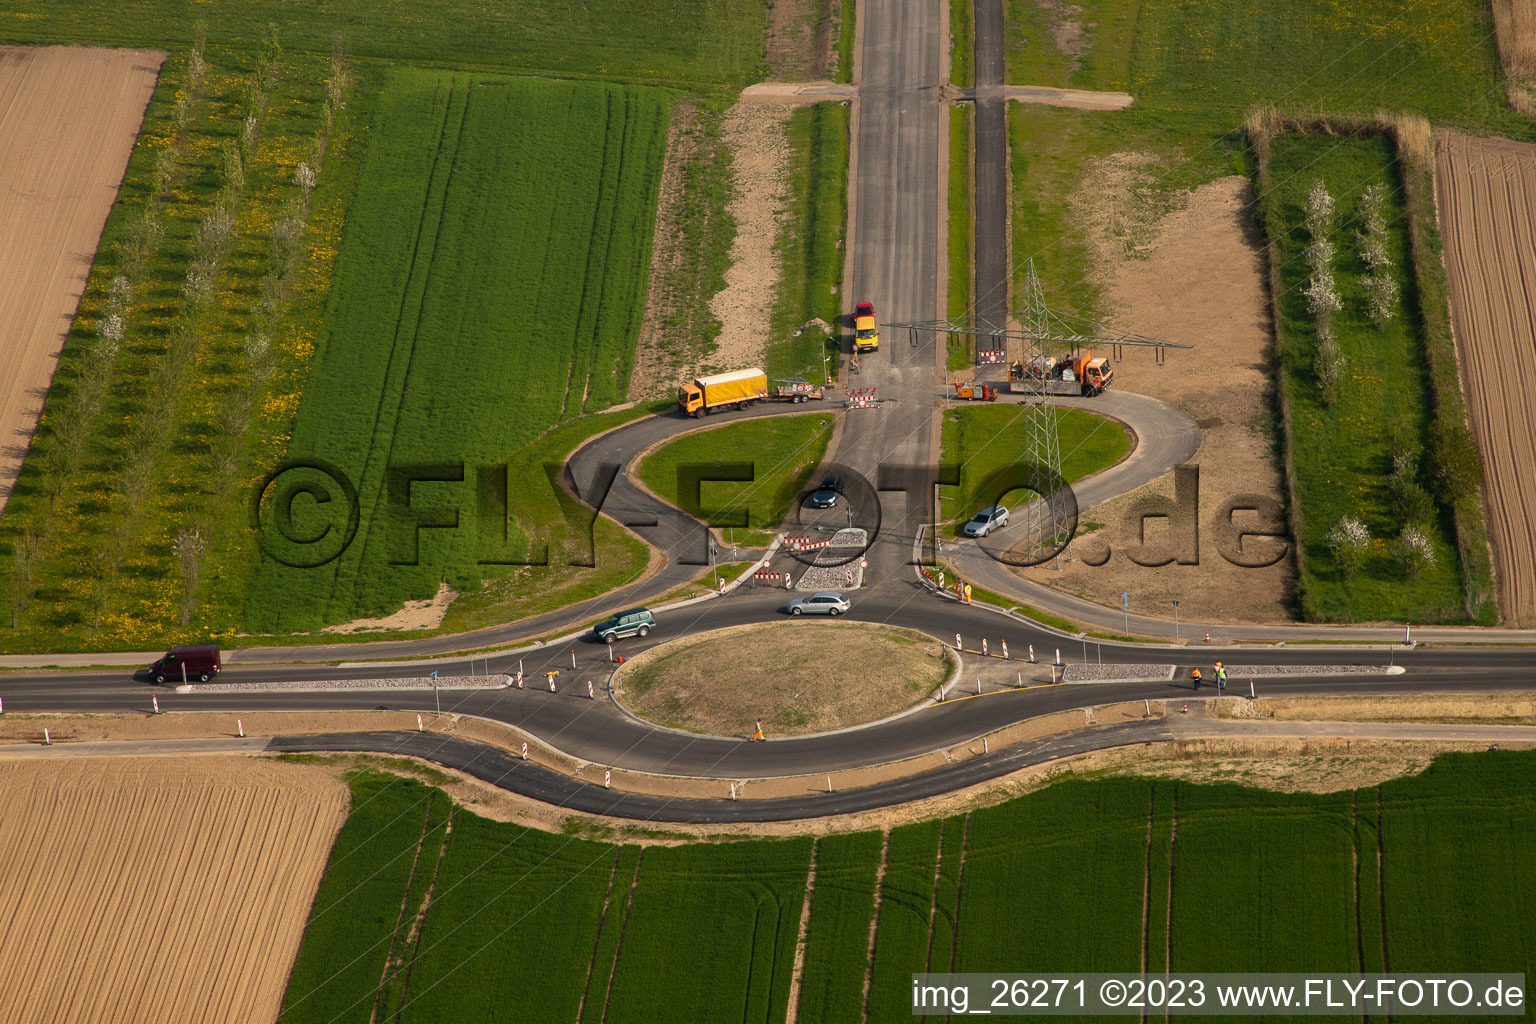 The new roundabout to the Horst industrial area in the district Minderslachen in Kandel in the state Rhineland-Palatinate, Germany